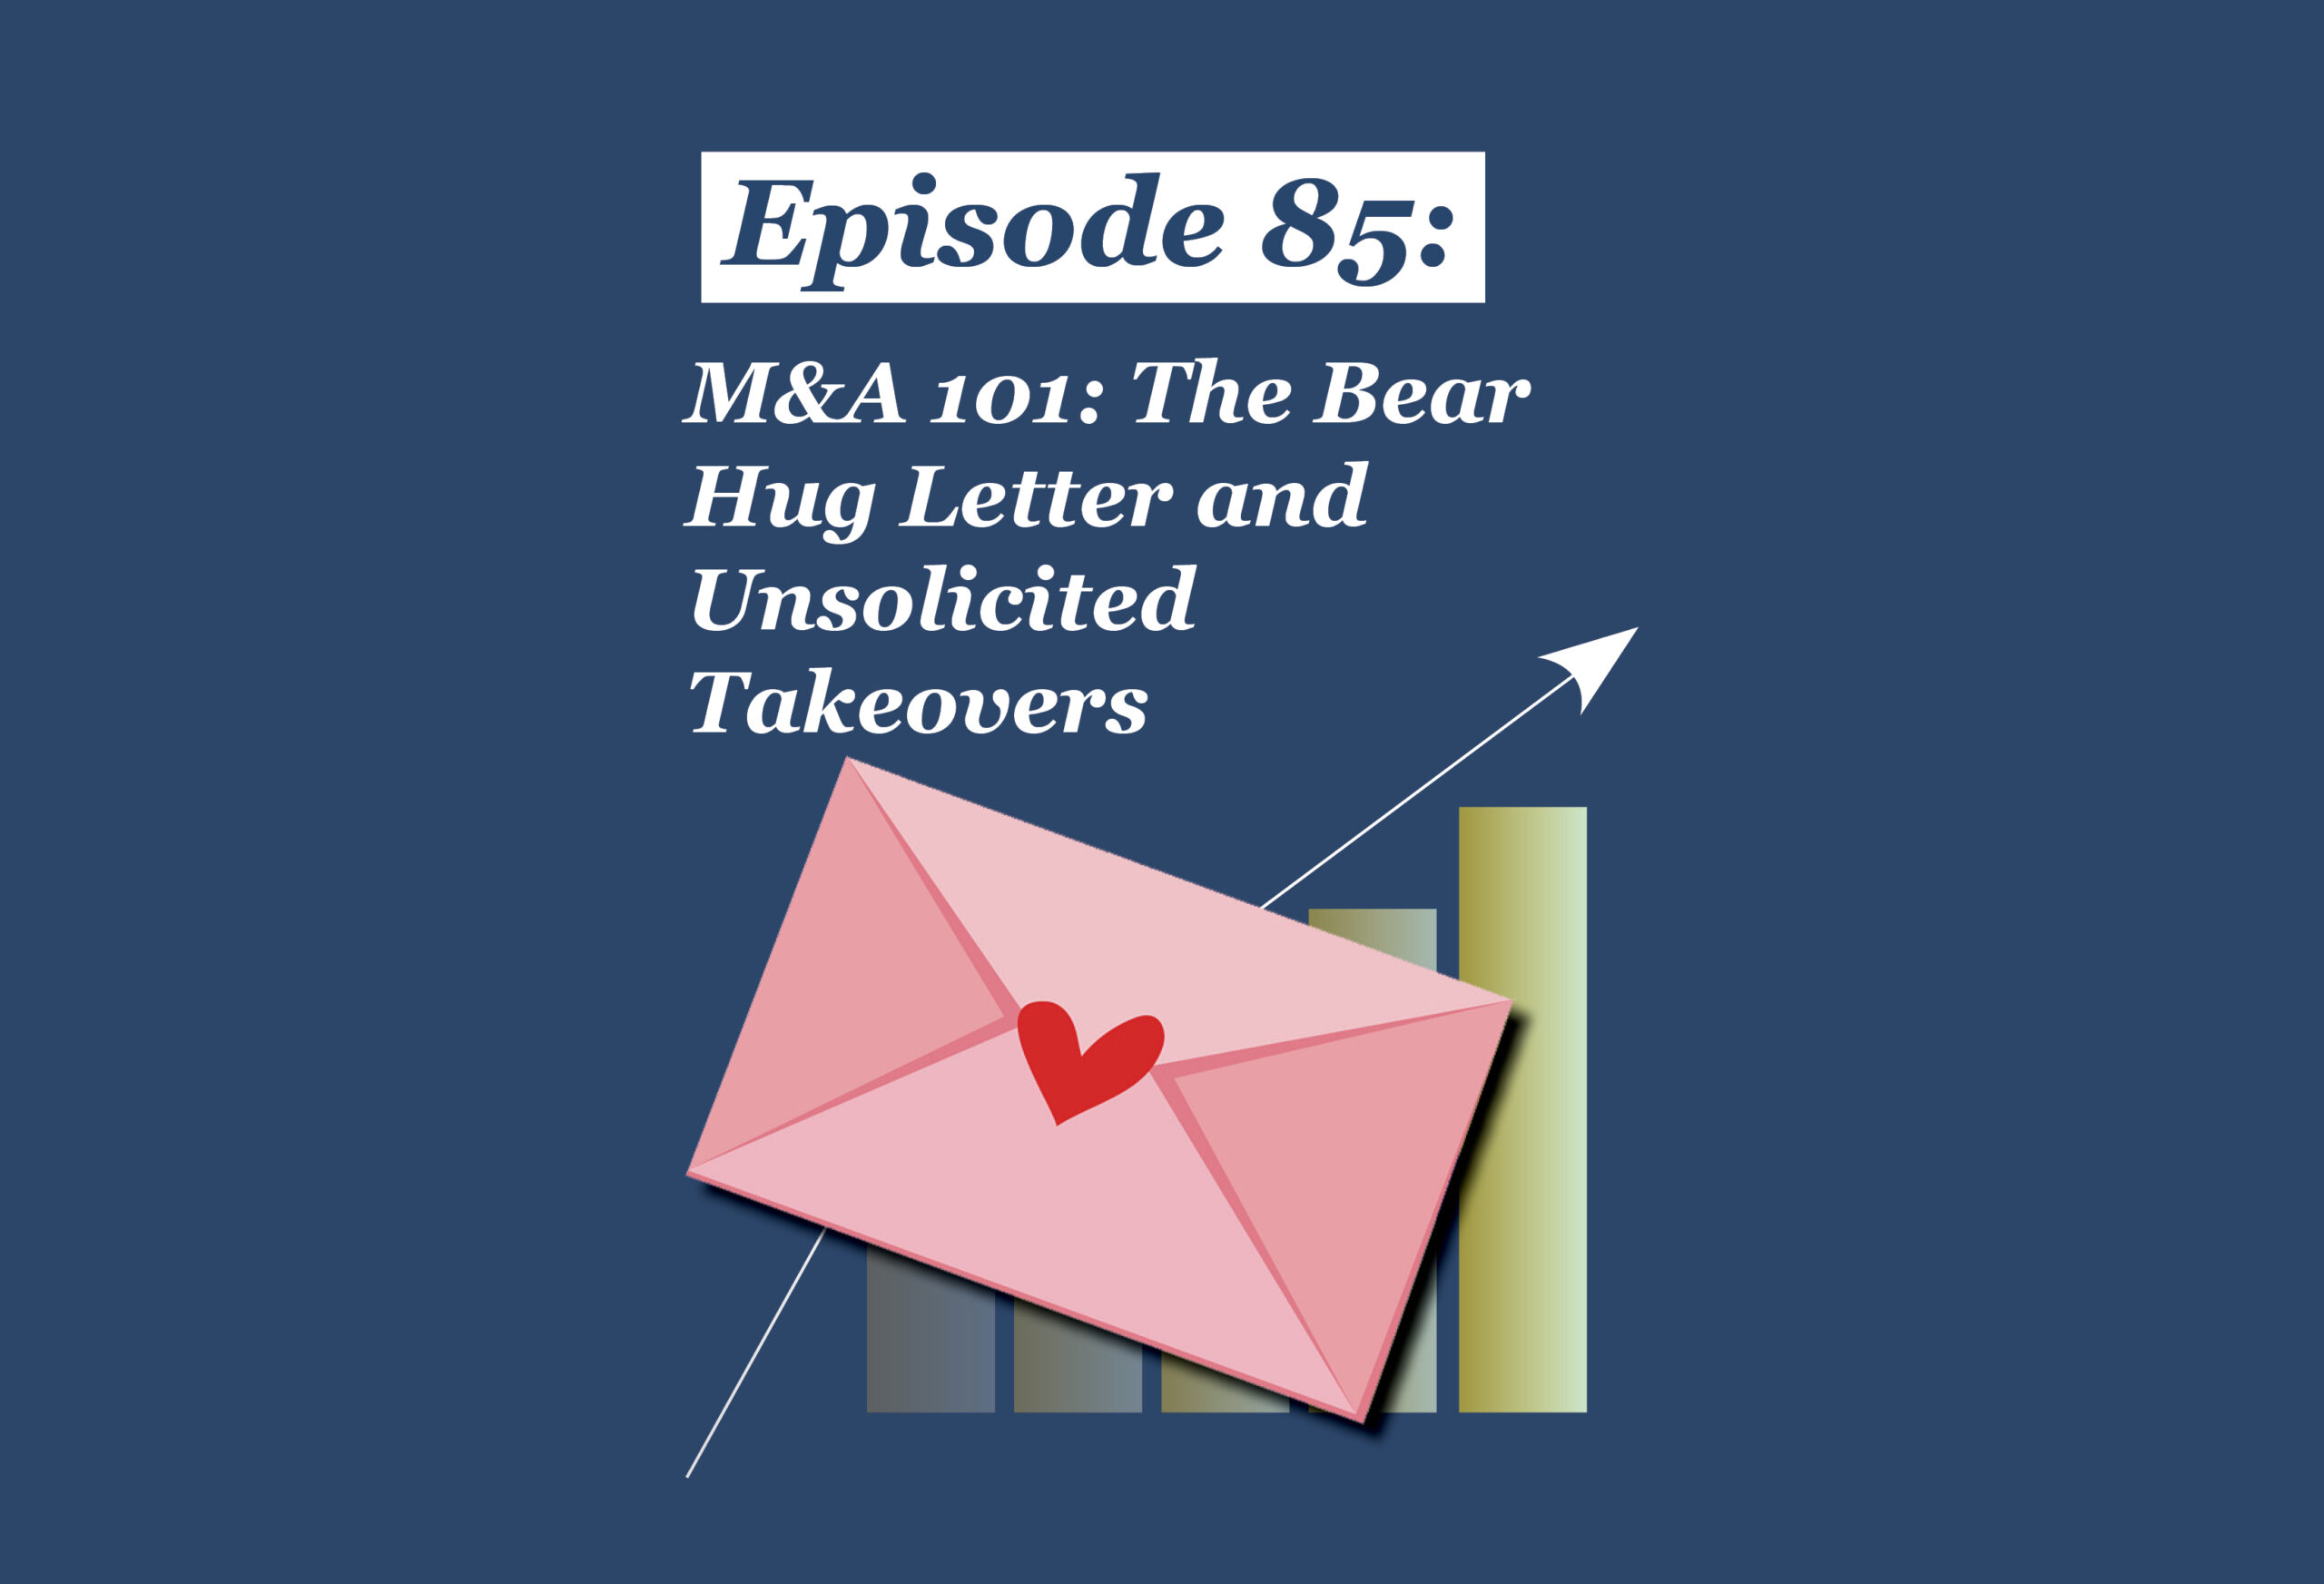 Absolute Return Podcast #85: M&A 101: The Bear Hug Letter and Unsolicited Takeovers